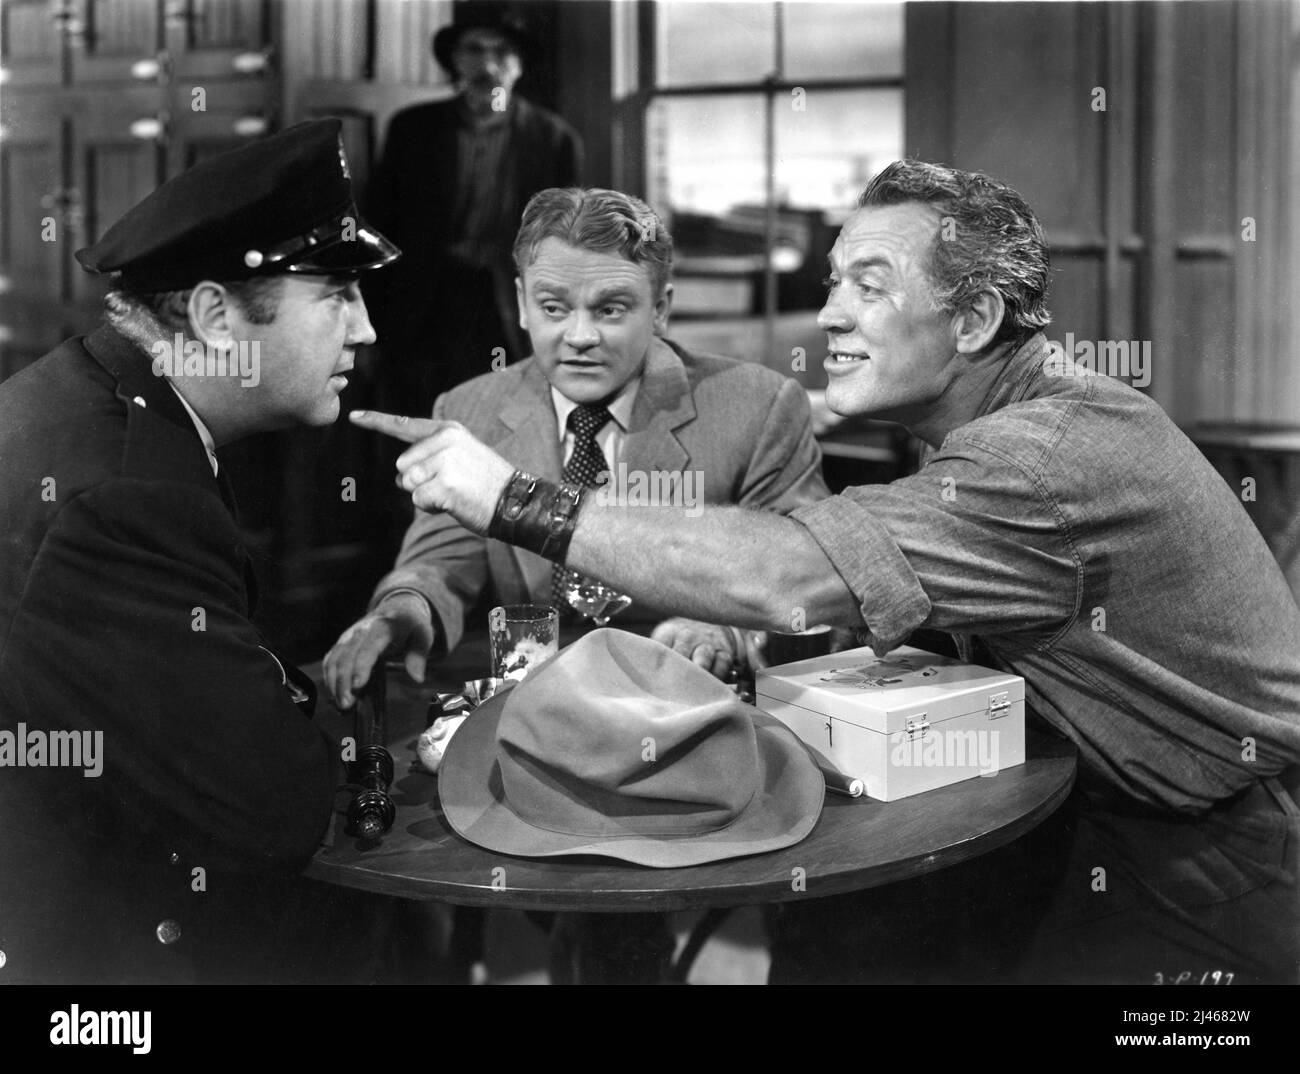 BRODERICK CRAWFORD JAMES CAGNEY and WARD BOND in THE TIME OF YOUR LIFE 1948 director H.C. POTTER Pulitzer Prize play William Saroyan adaptation Nathaniel Curtis William Cagney Productions / United Artists Stock Photo